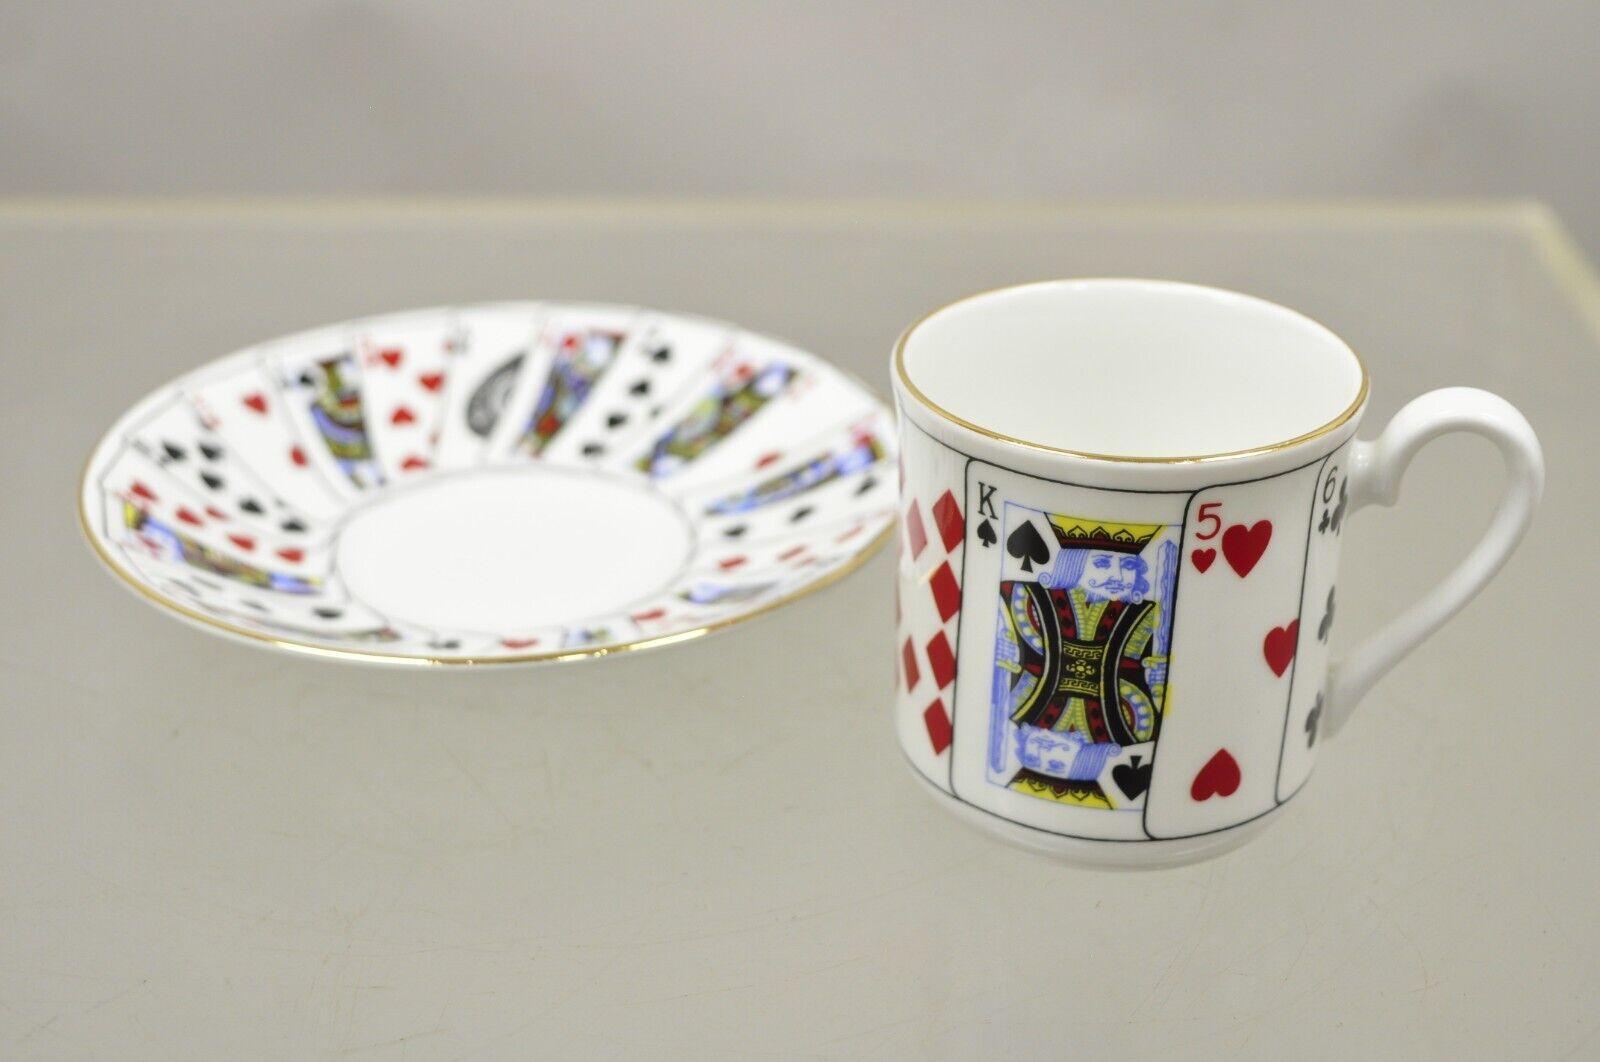 European Tiffany & Co Staffordshire Playing Cards Demitasse Tea Cup & Saucer, Set of 4